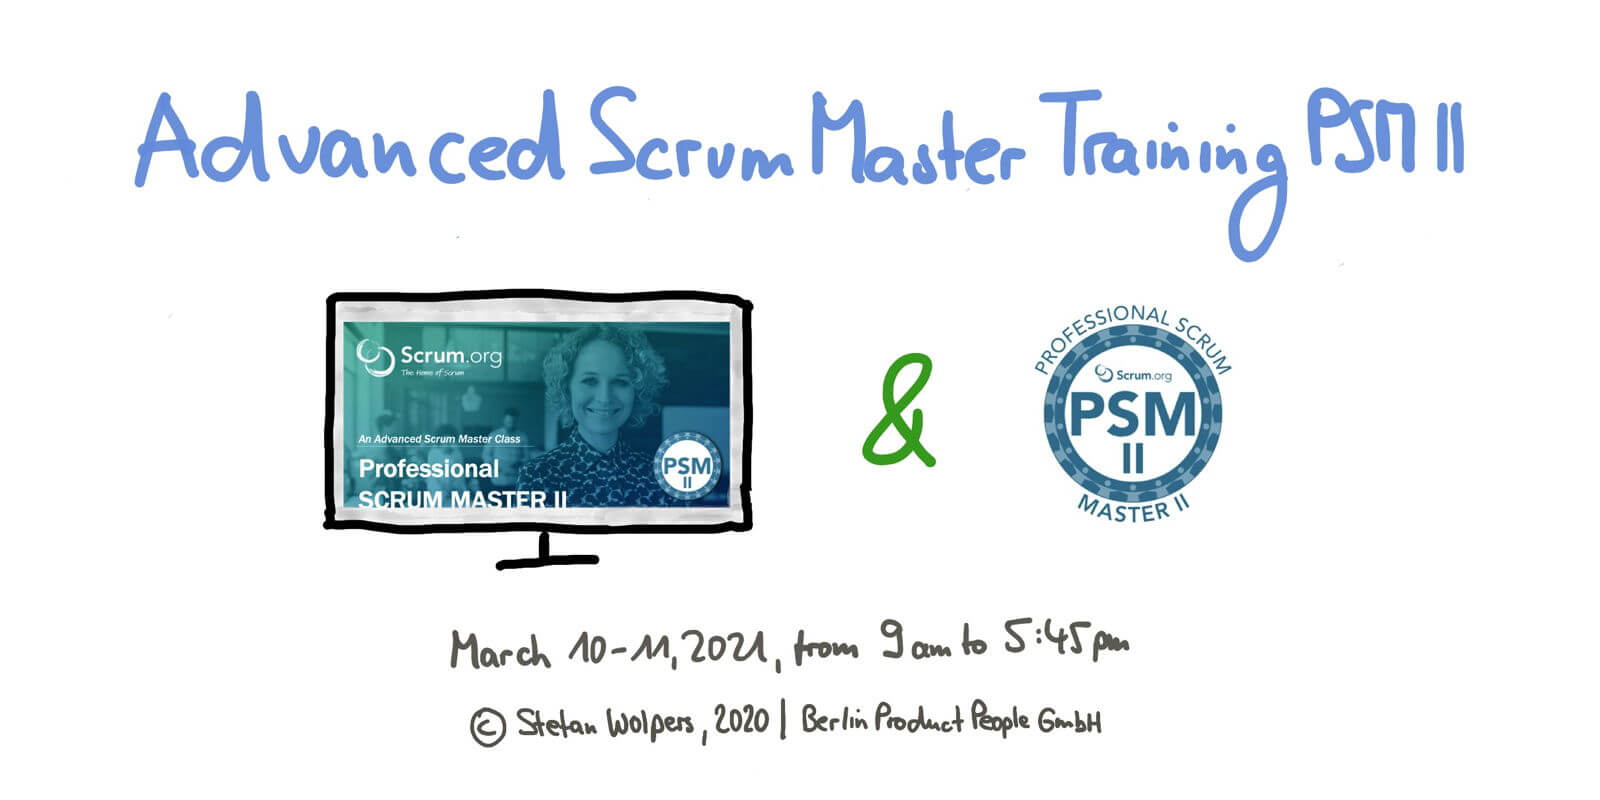 🖥 Advanced Professional Scrum Master Online Training w/ PSM II Certificate — March 10-11, 2021  — Berlin Product People GmbH